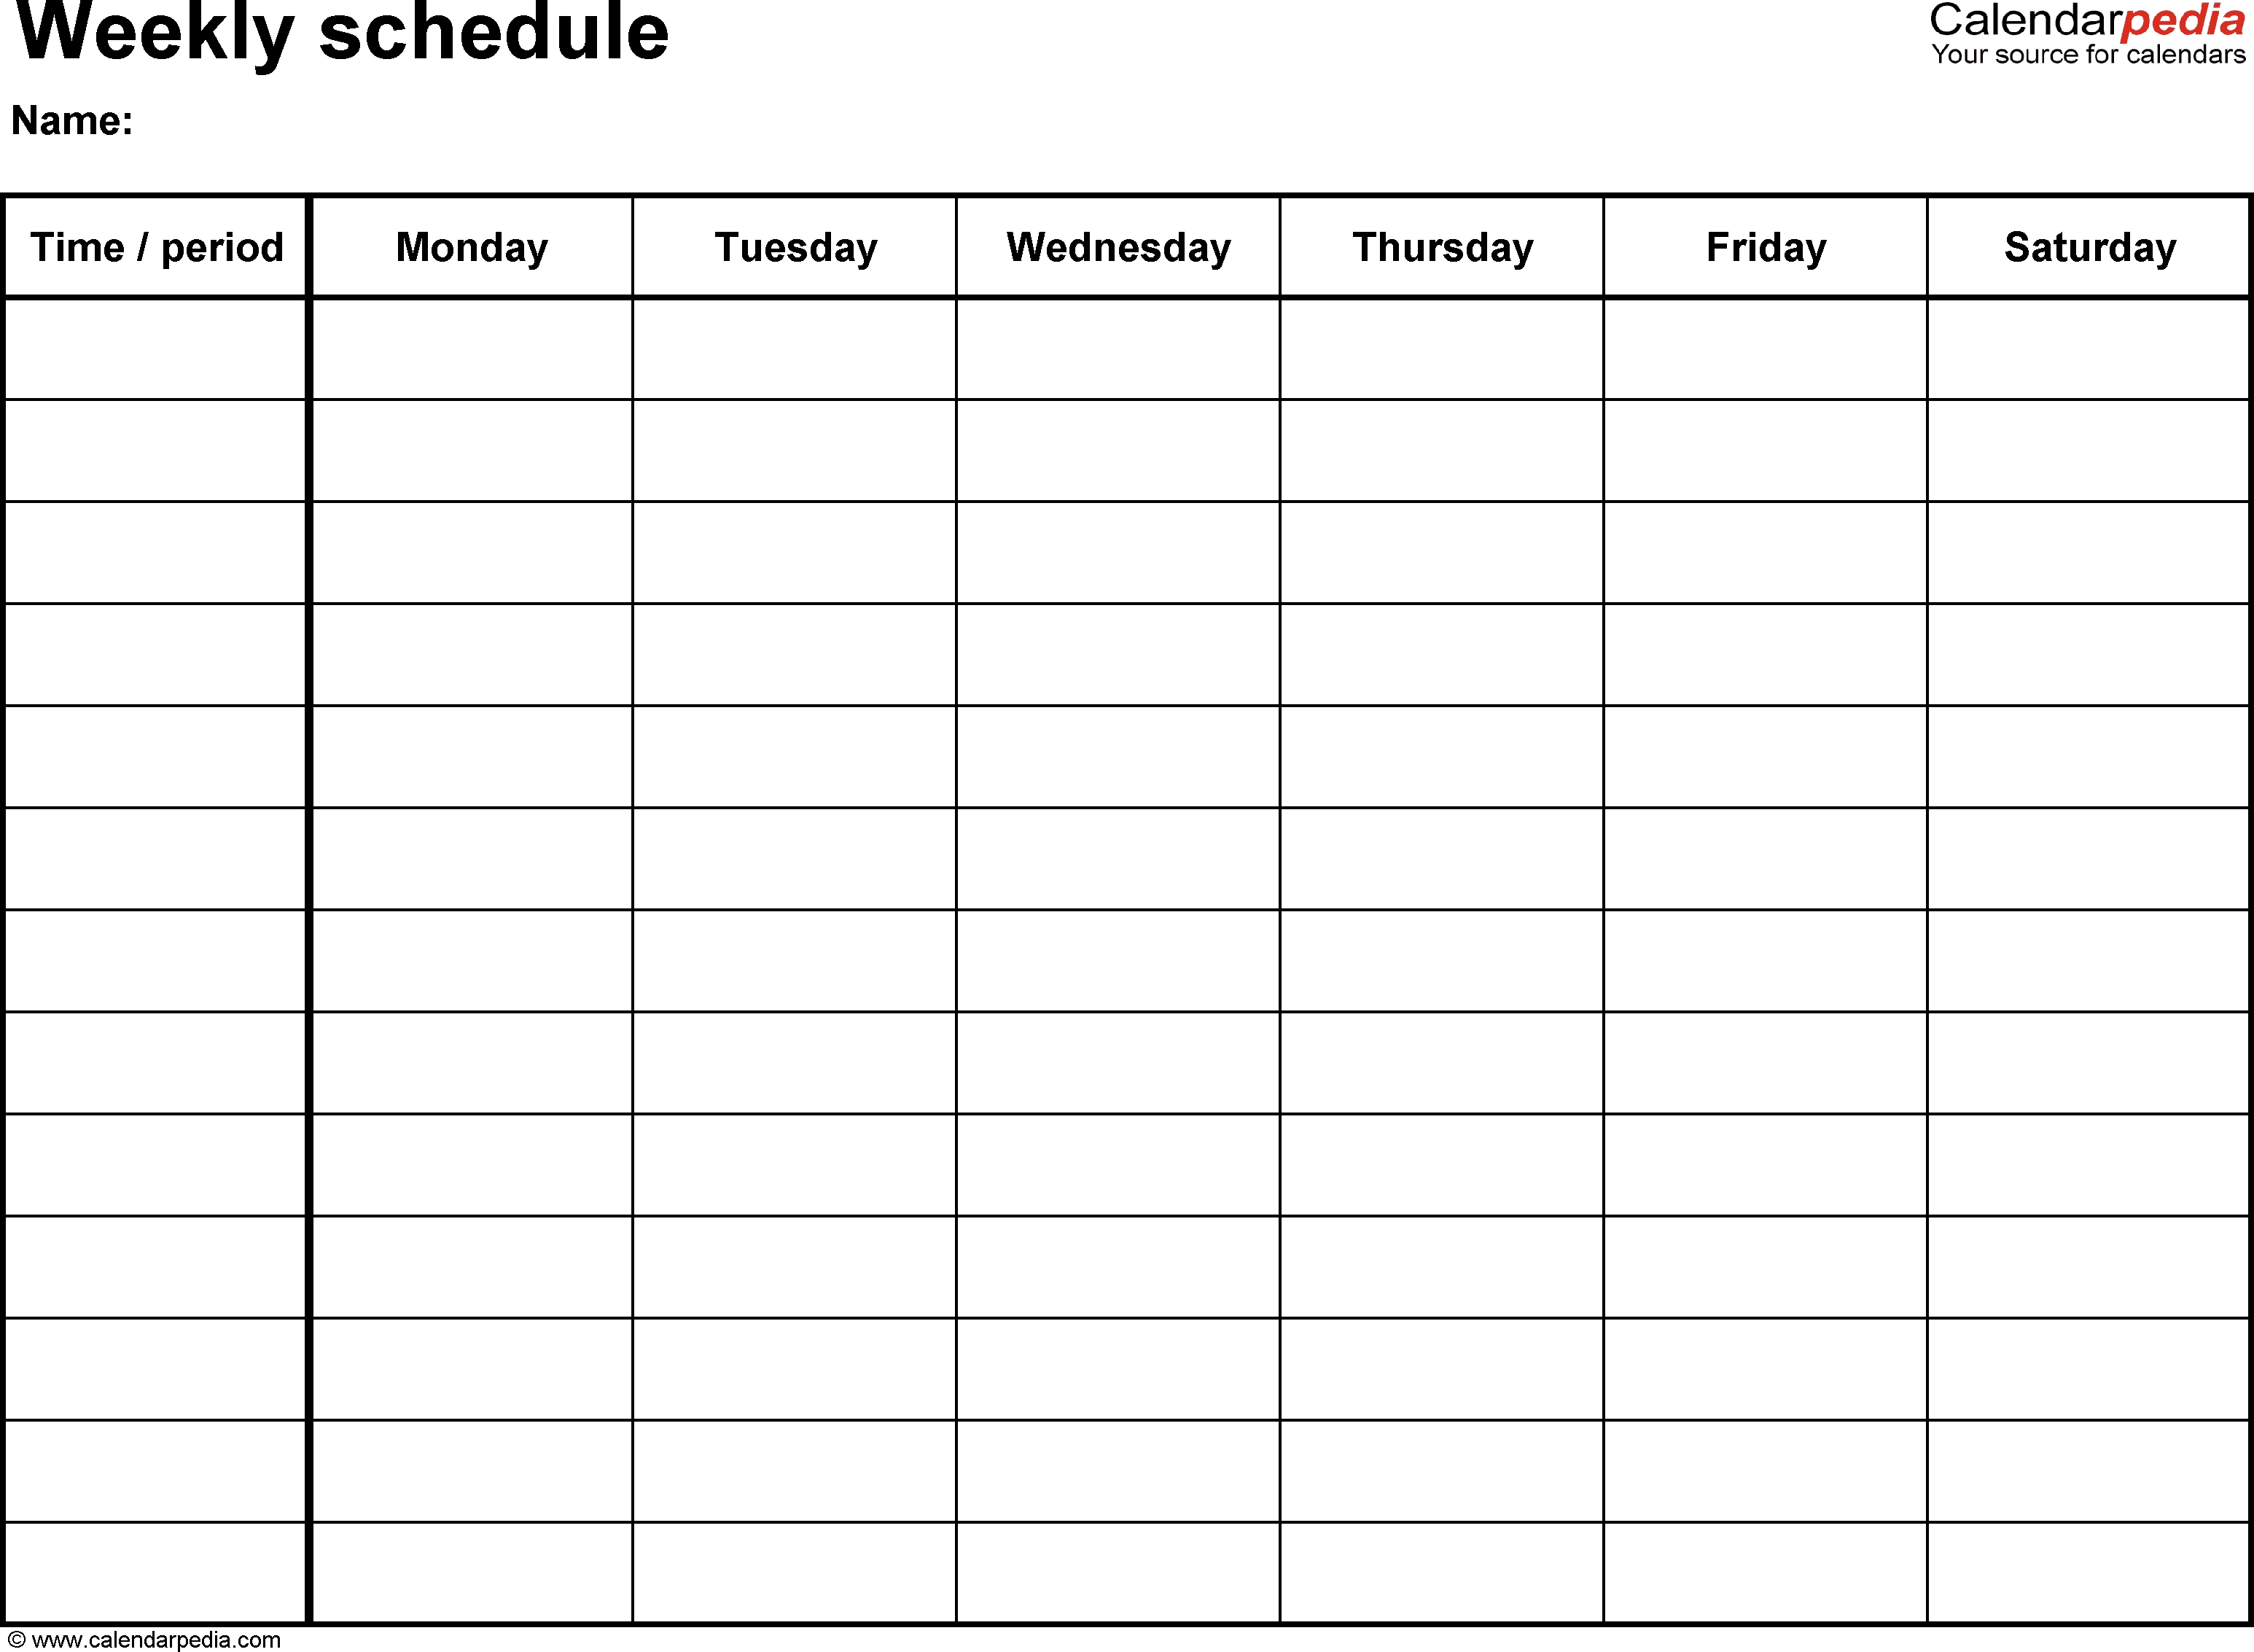 Free Weekly Schedule Templates For Pdf - 18 Templates throughout 5 Day Weekly Schedule Template